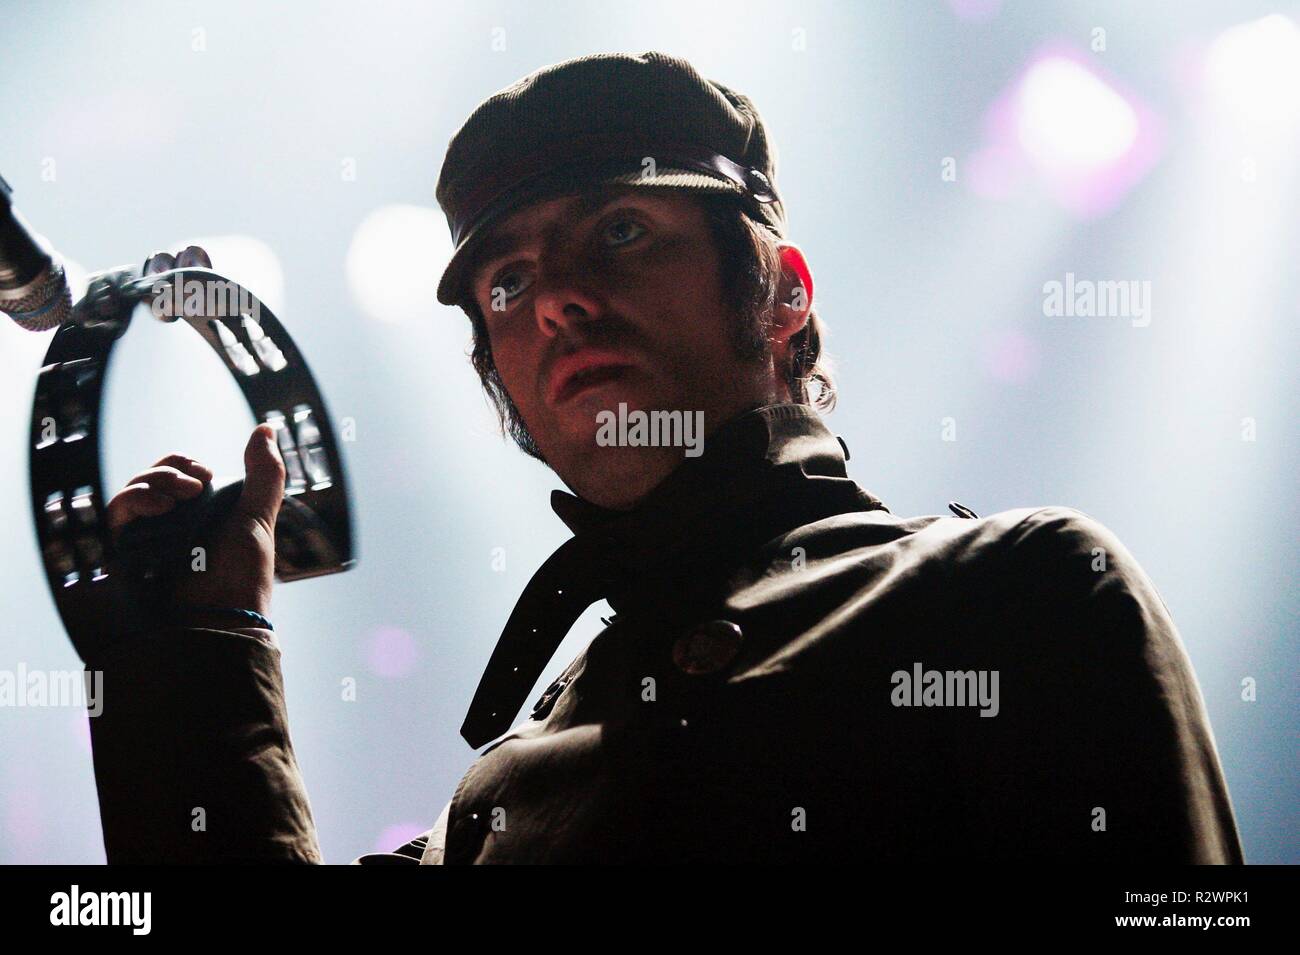 LIAM GALLAGHER OASIS 20 octobre 2005 CTS Allstar61896/Cinetext/Hambourg Banque D'Images